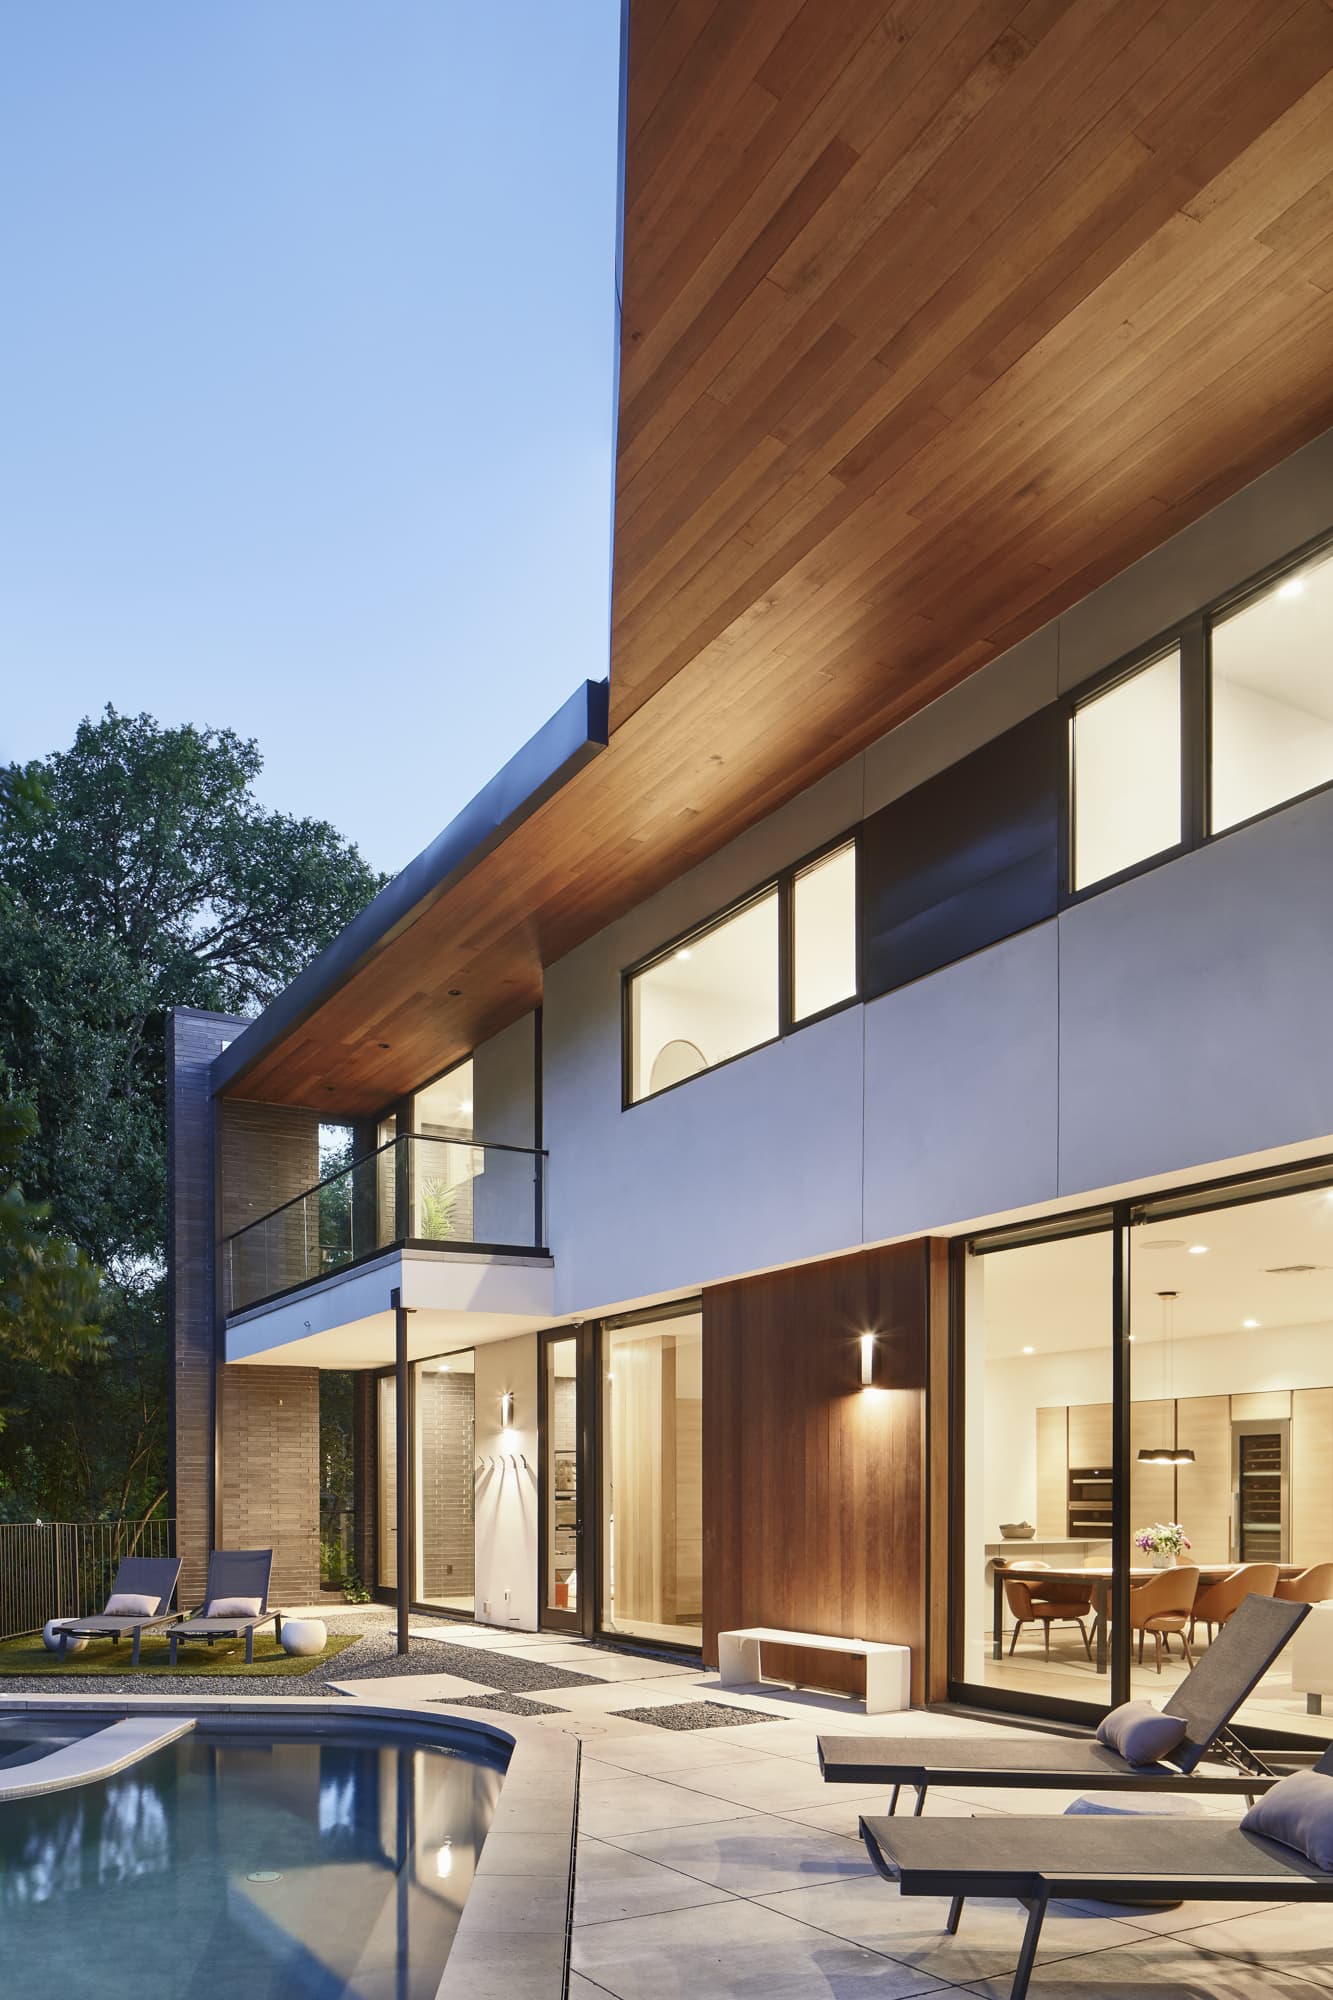 View of Pool in Modern Home designed by Austin Architect Jay Corder